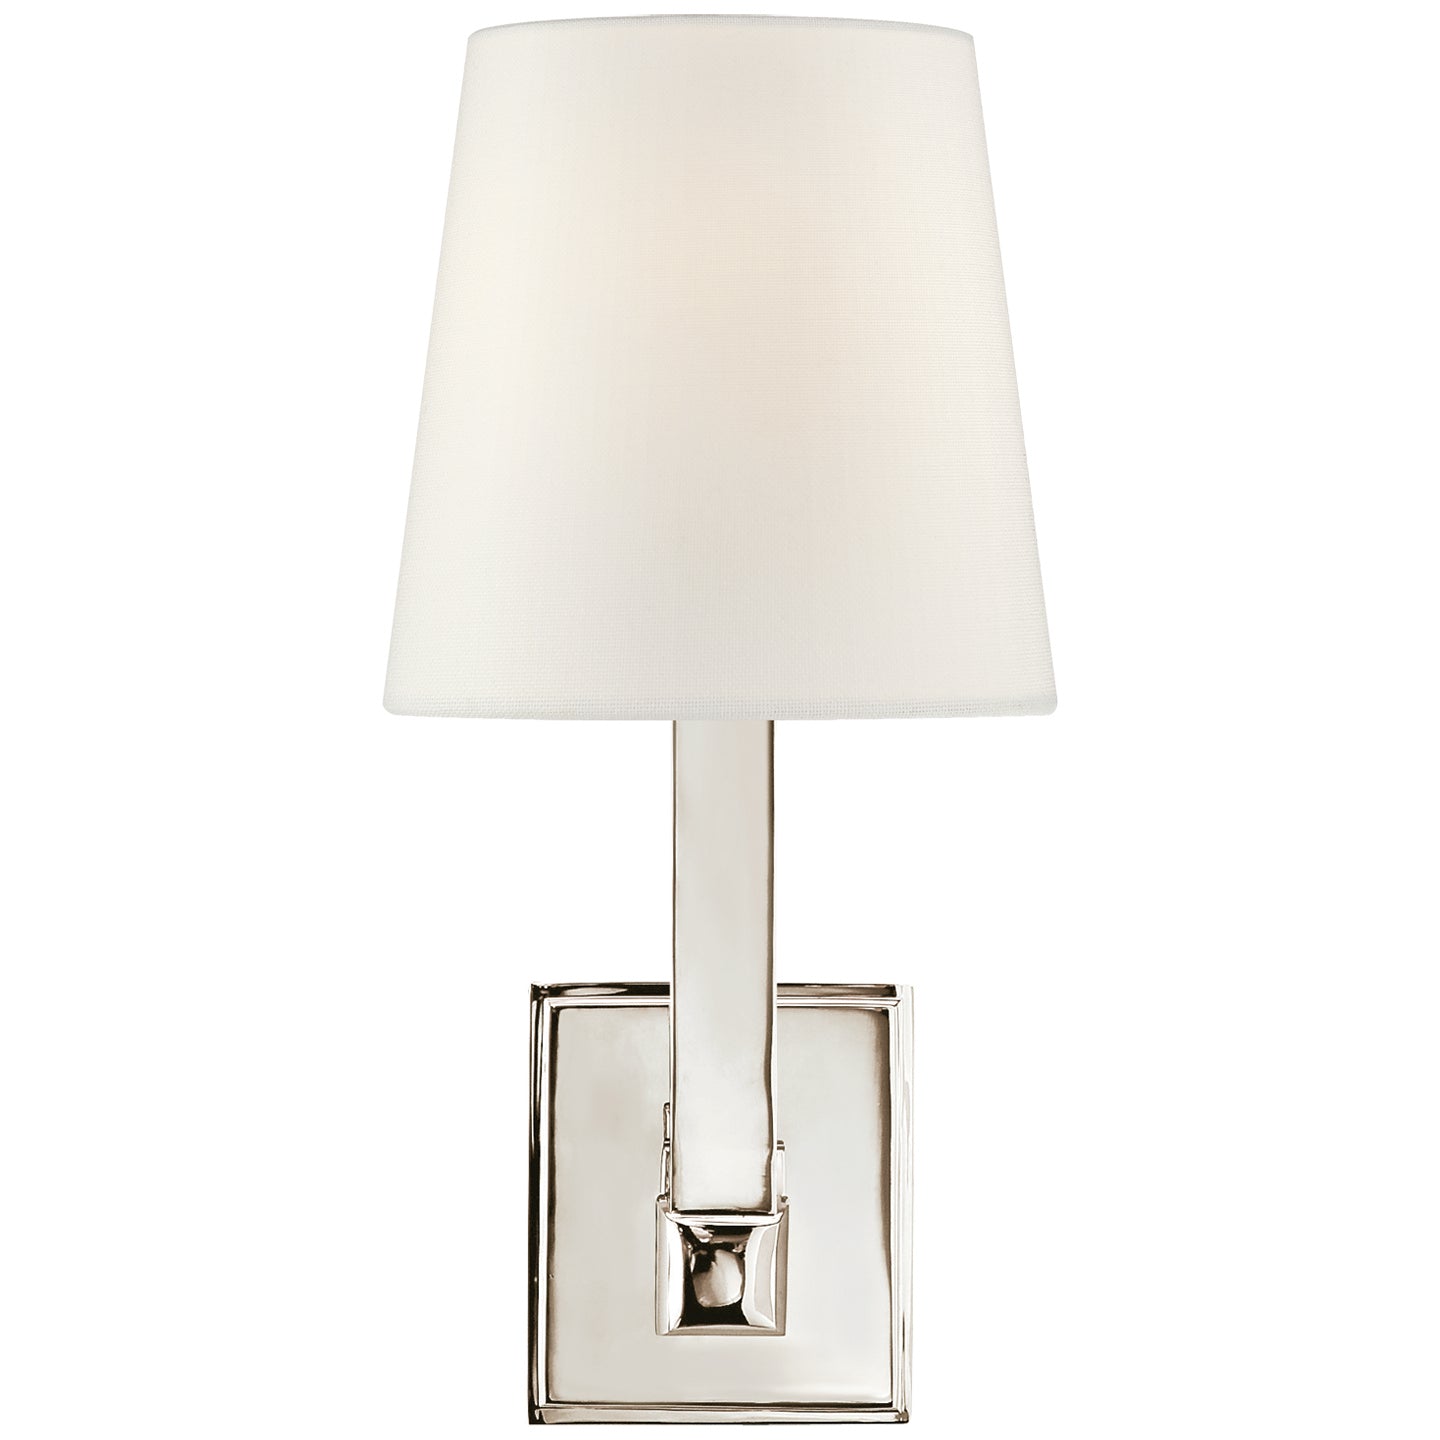 Load image into Gallery viewer, Visual Comfort Signature - SL 2819PN-L - One Light Wall Sconce - Square Tube - Polished Nickel
